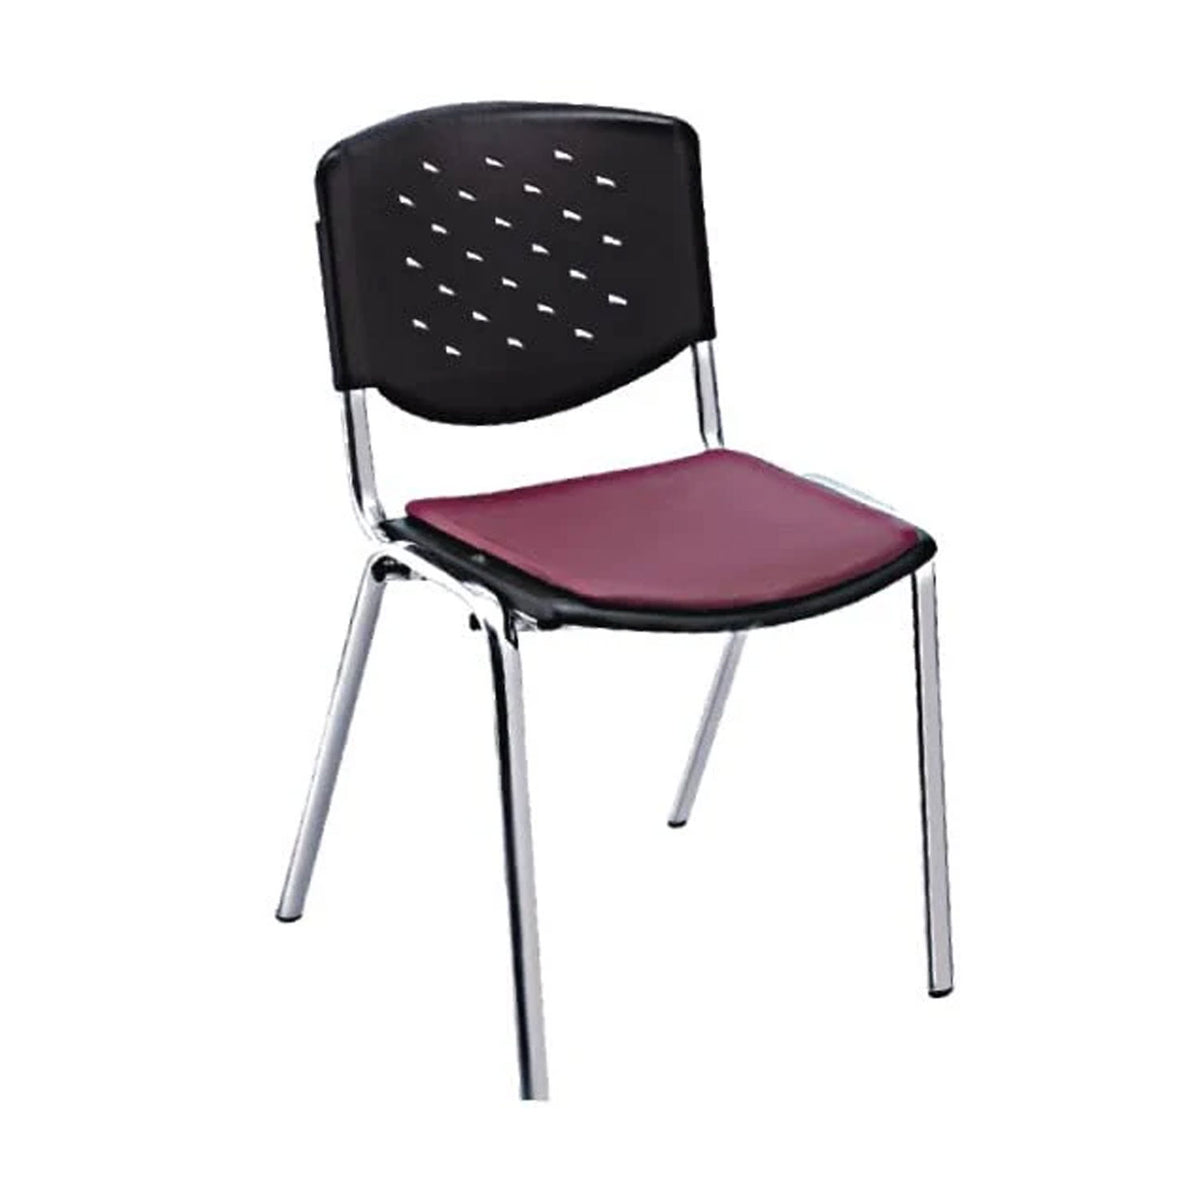 SmileSellers Visitor Chair for | Office | Home | Study | Restaurant | Café Without arm Rest with Steel Four Leg Frame and Cushioned seat Back is PVC